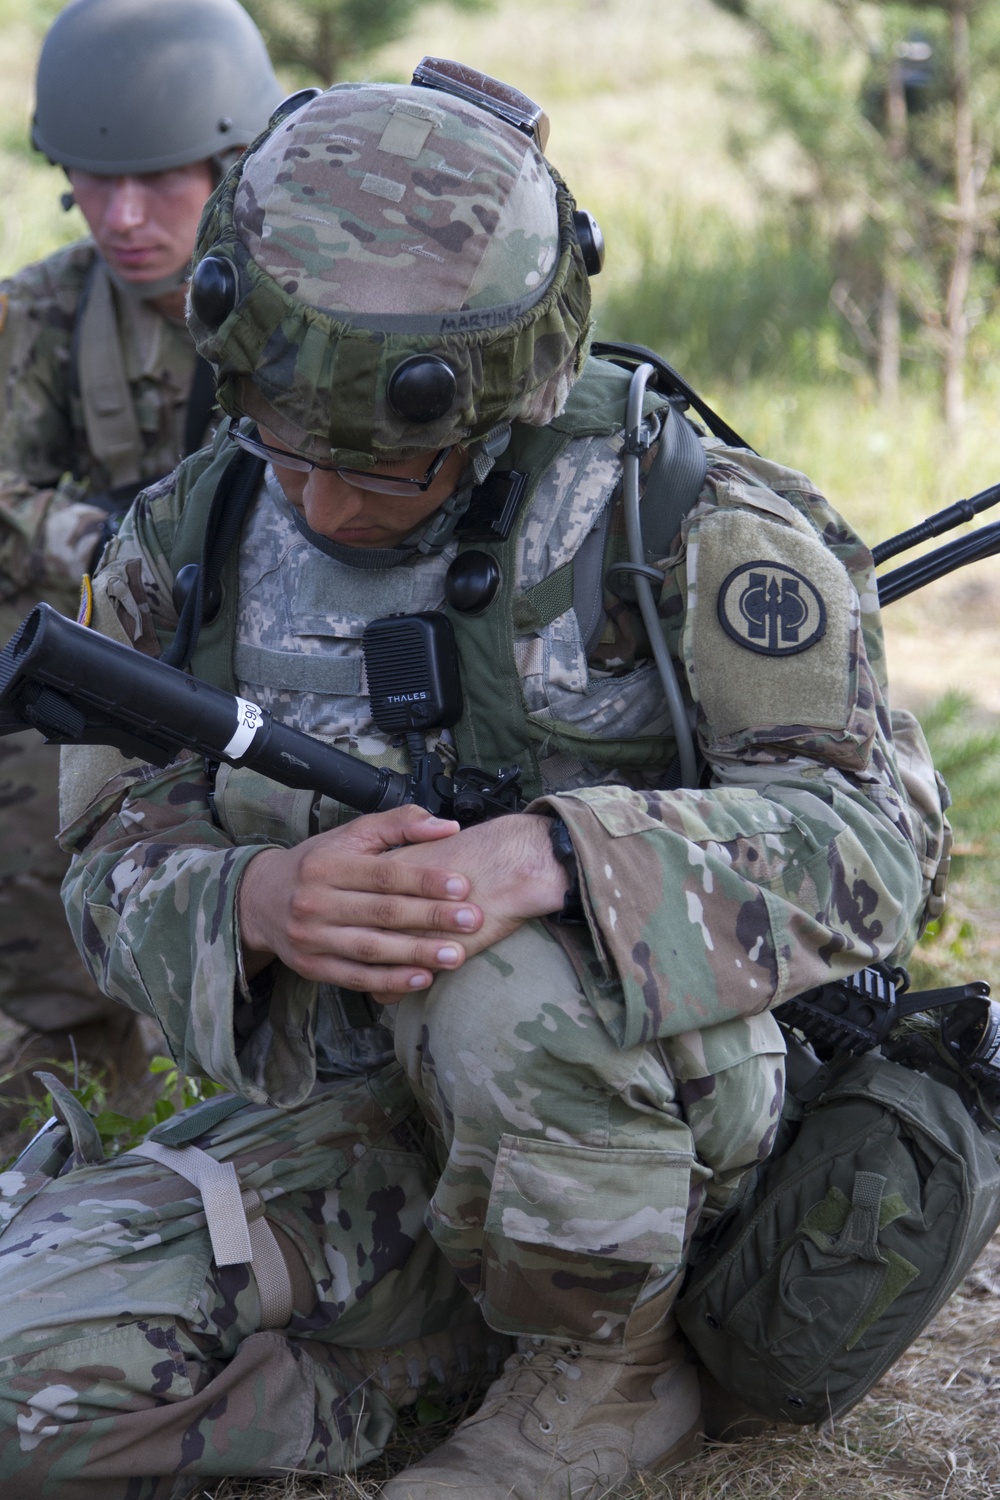 2Lt. Alberto Martinez, 491st Military Police Company, Riverside, California, prays during a religious service at Fort McCoy